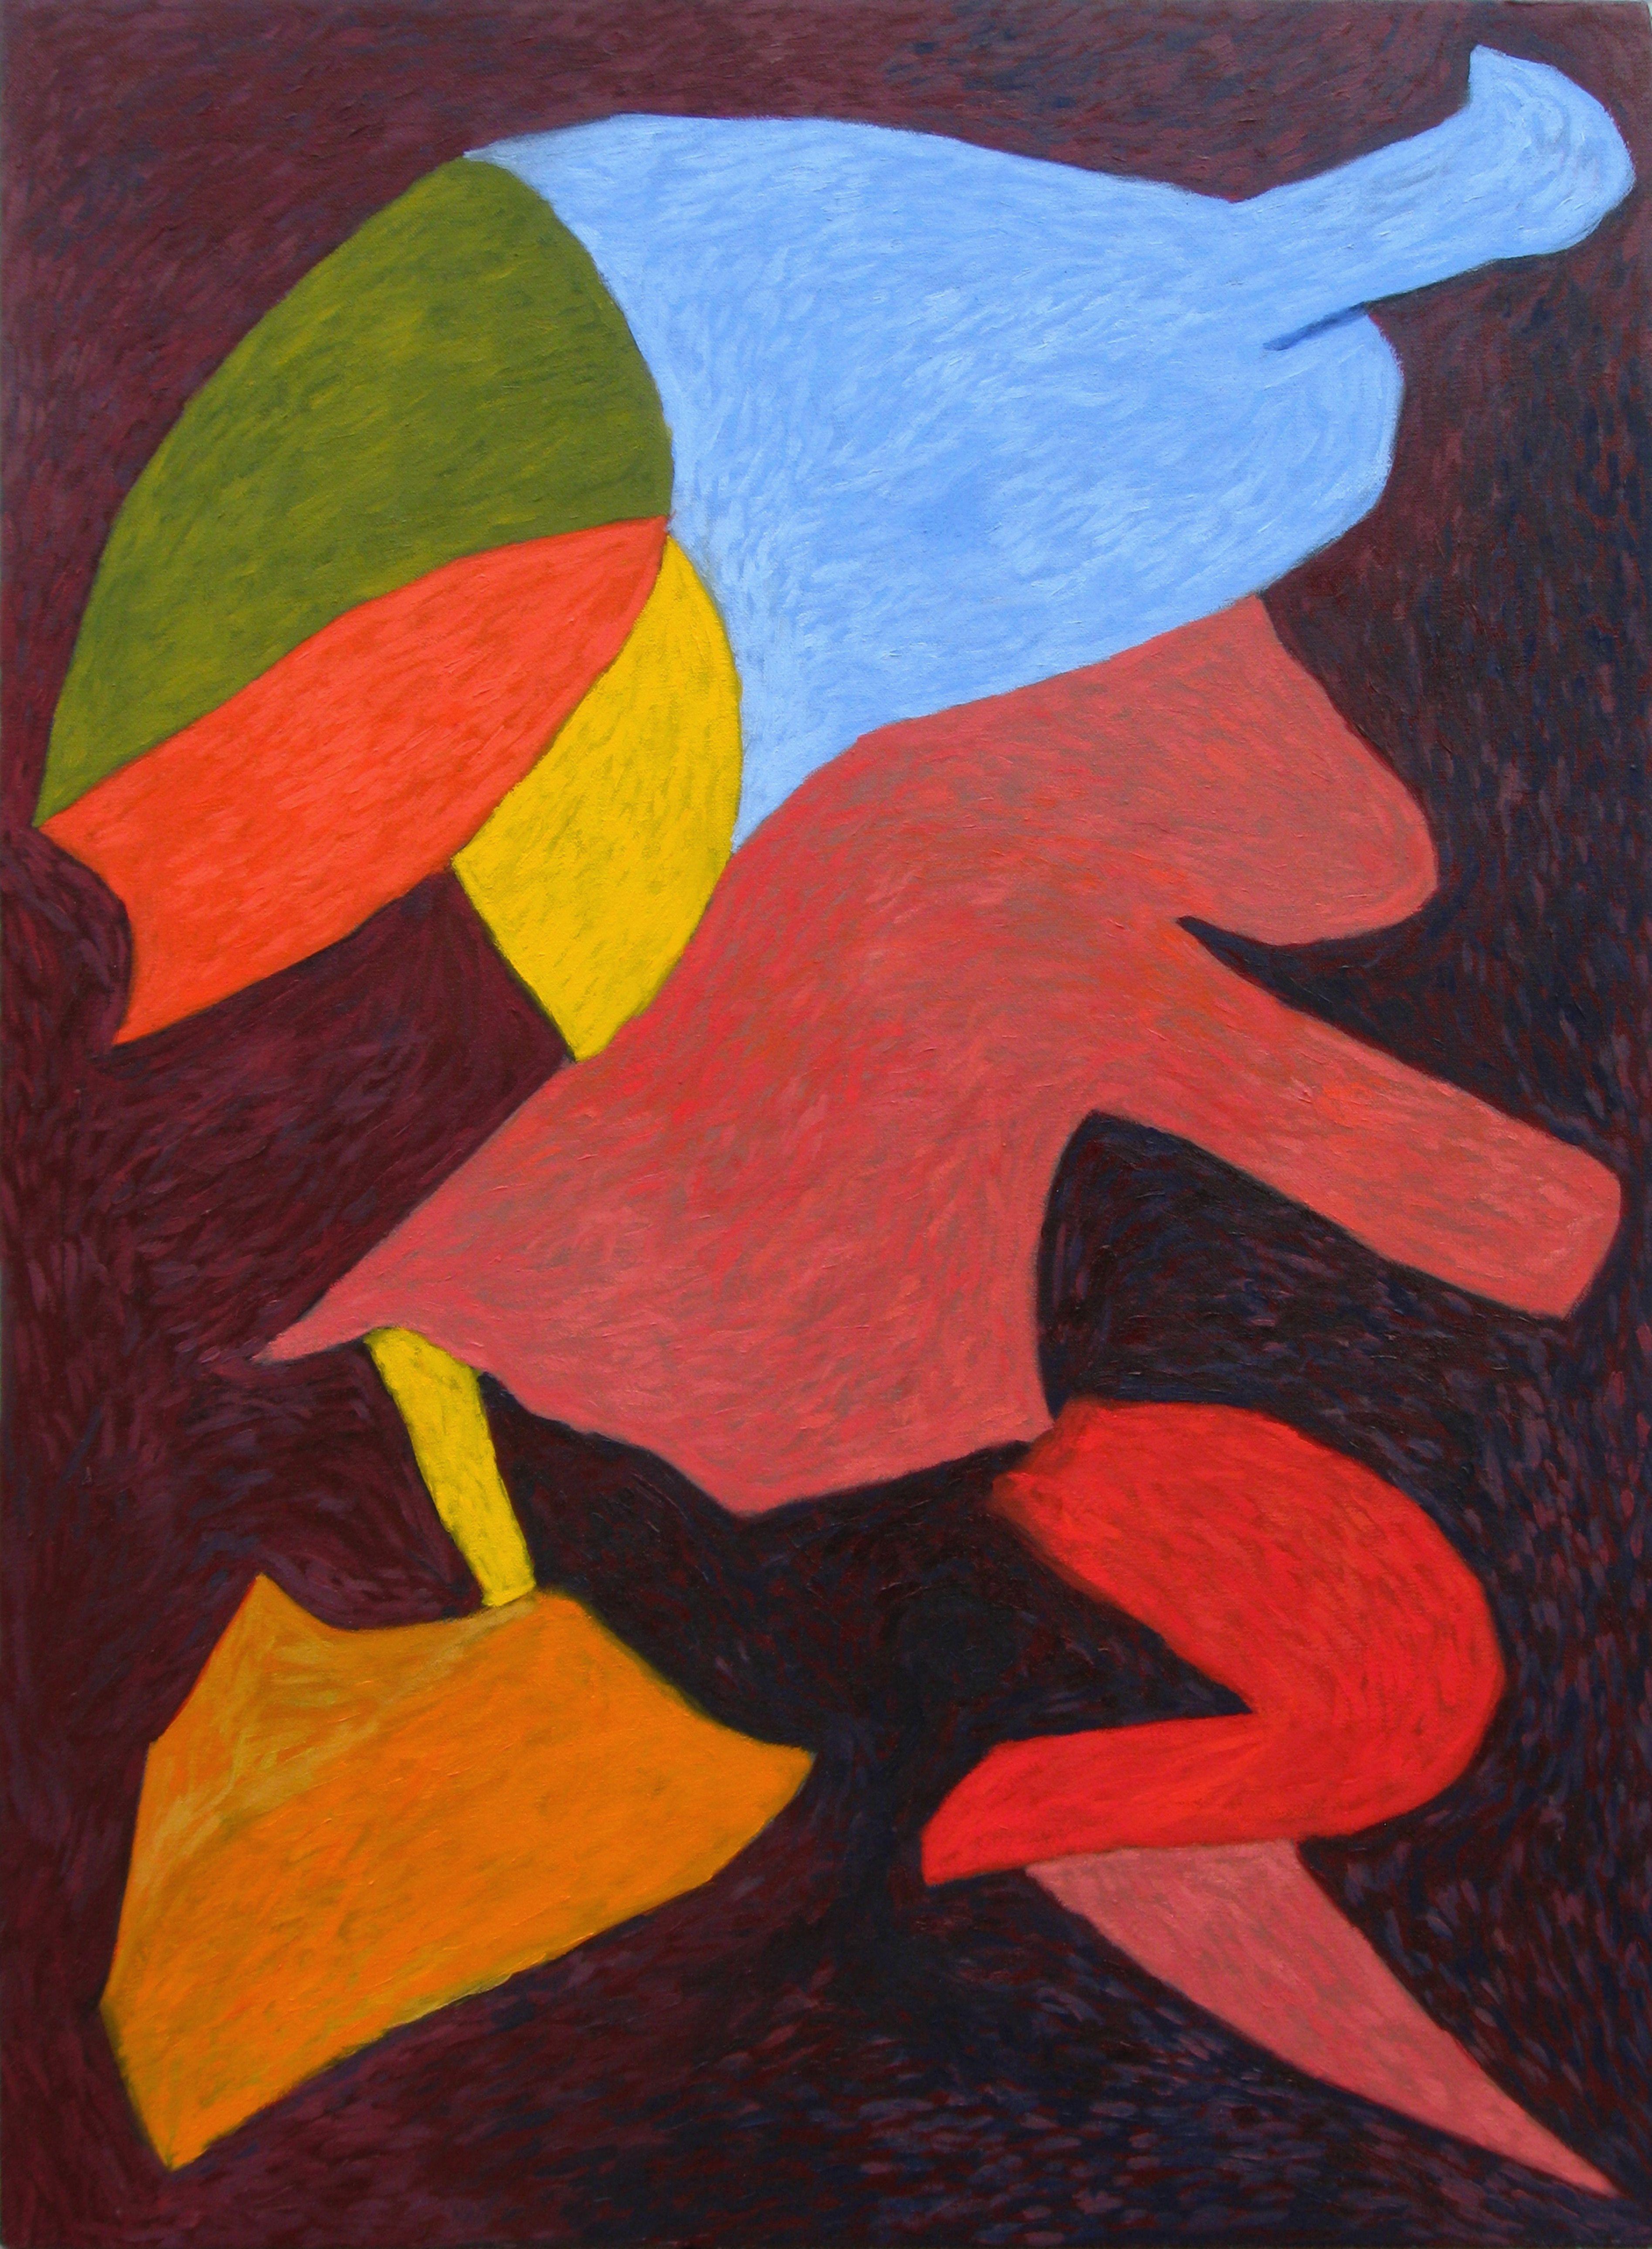 Craig Moran Abstract Painting - Day Glo Hobo, Painting, Oil on Canvas